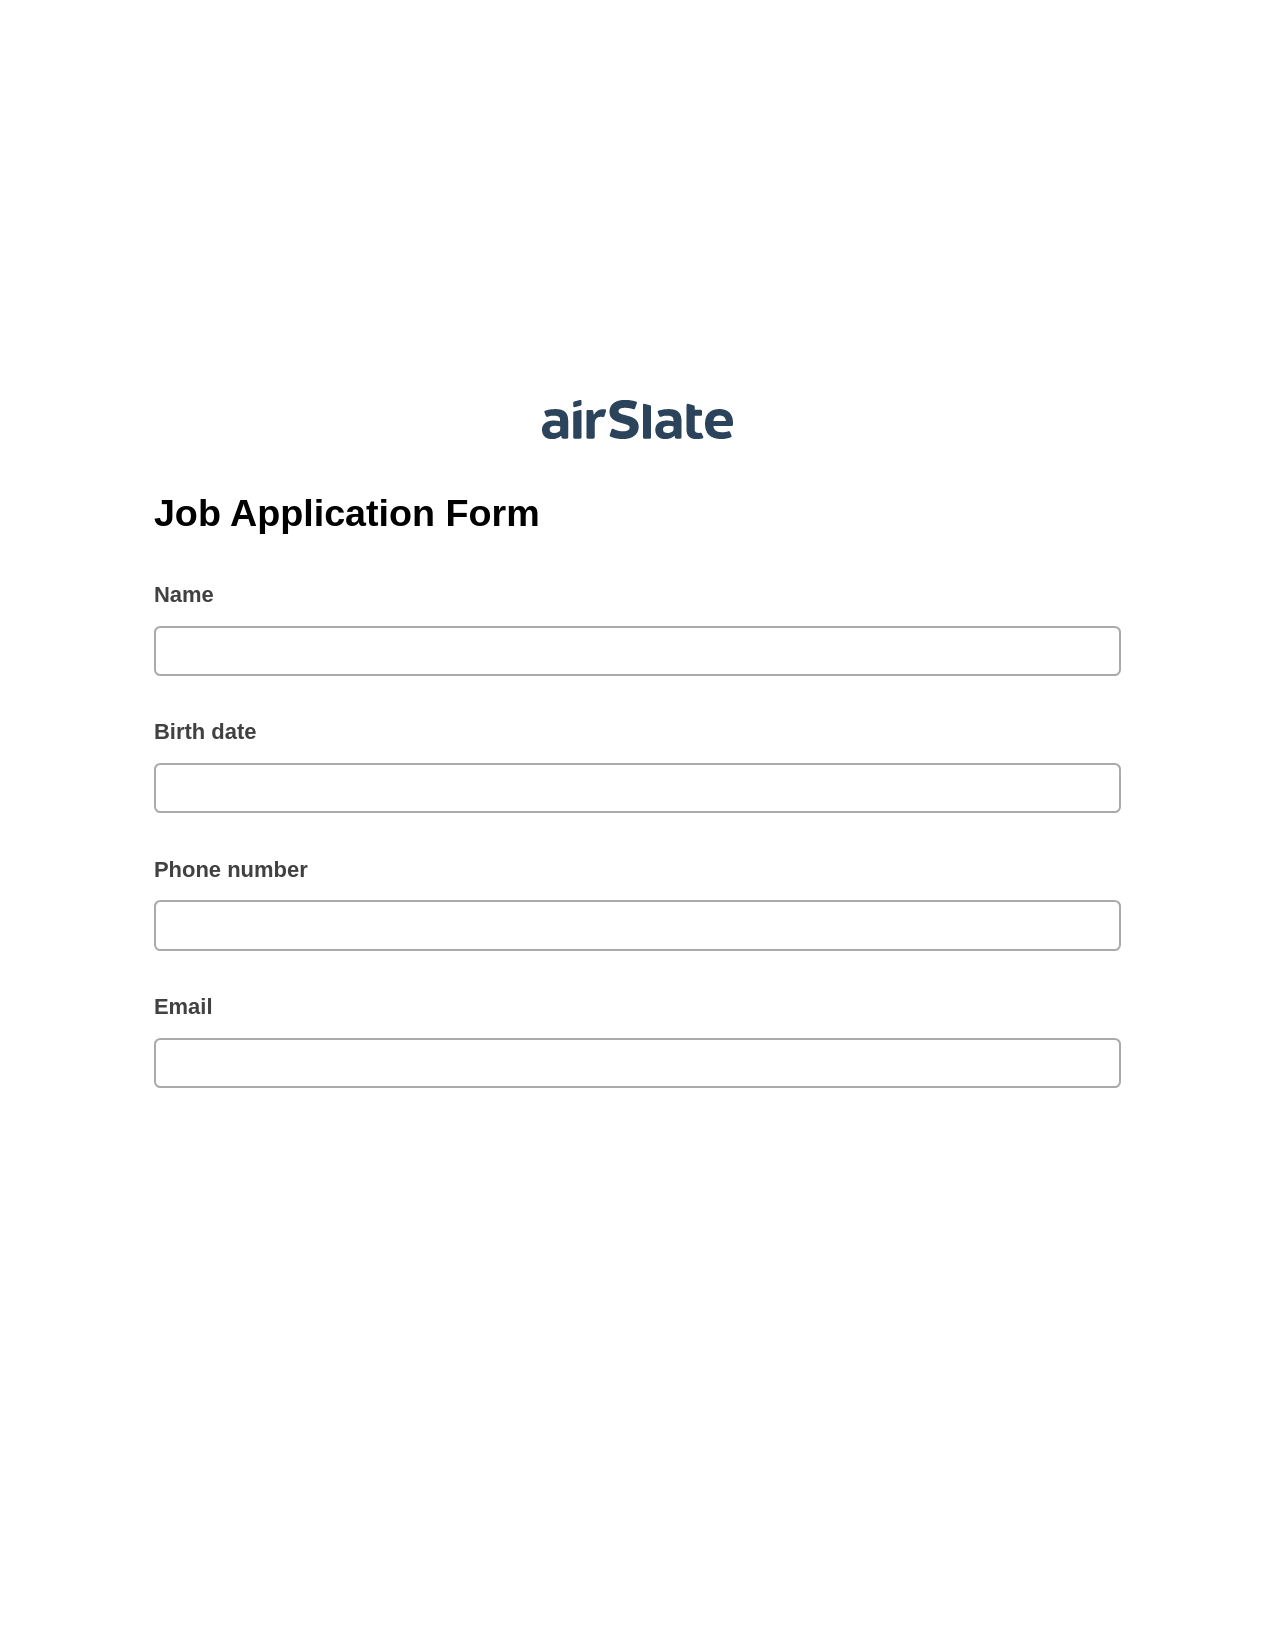 Job Application Form Pre-fill from Google Sheets Bot, Assign Slate Name Bot, Archive to SharePoint Folder Bot